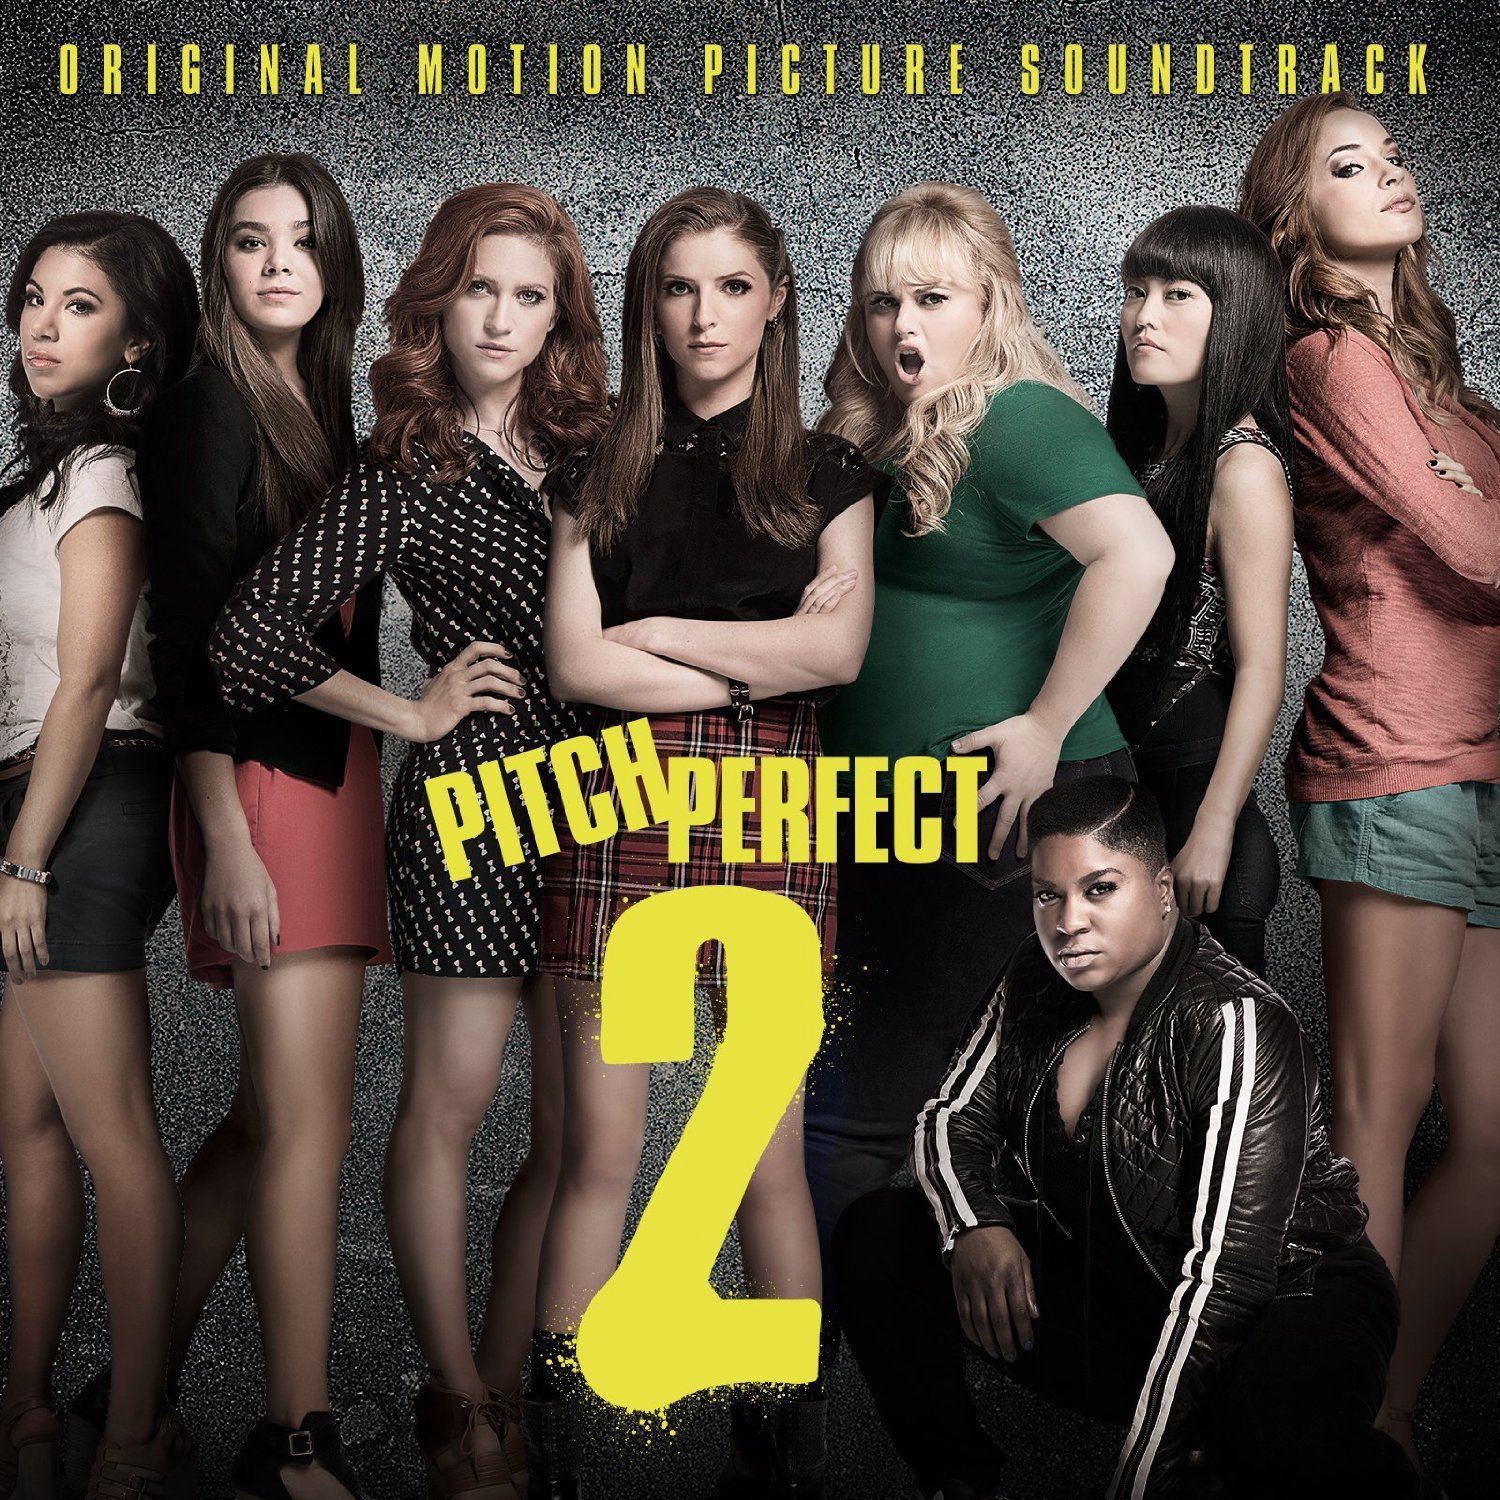 What happened in Pitch Perfect 2?